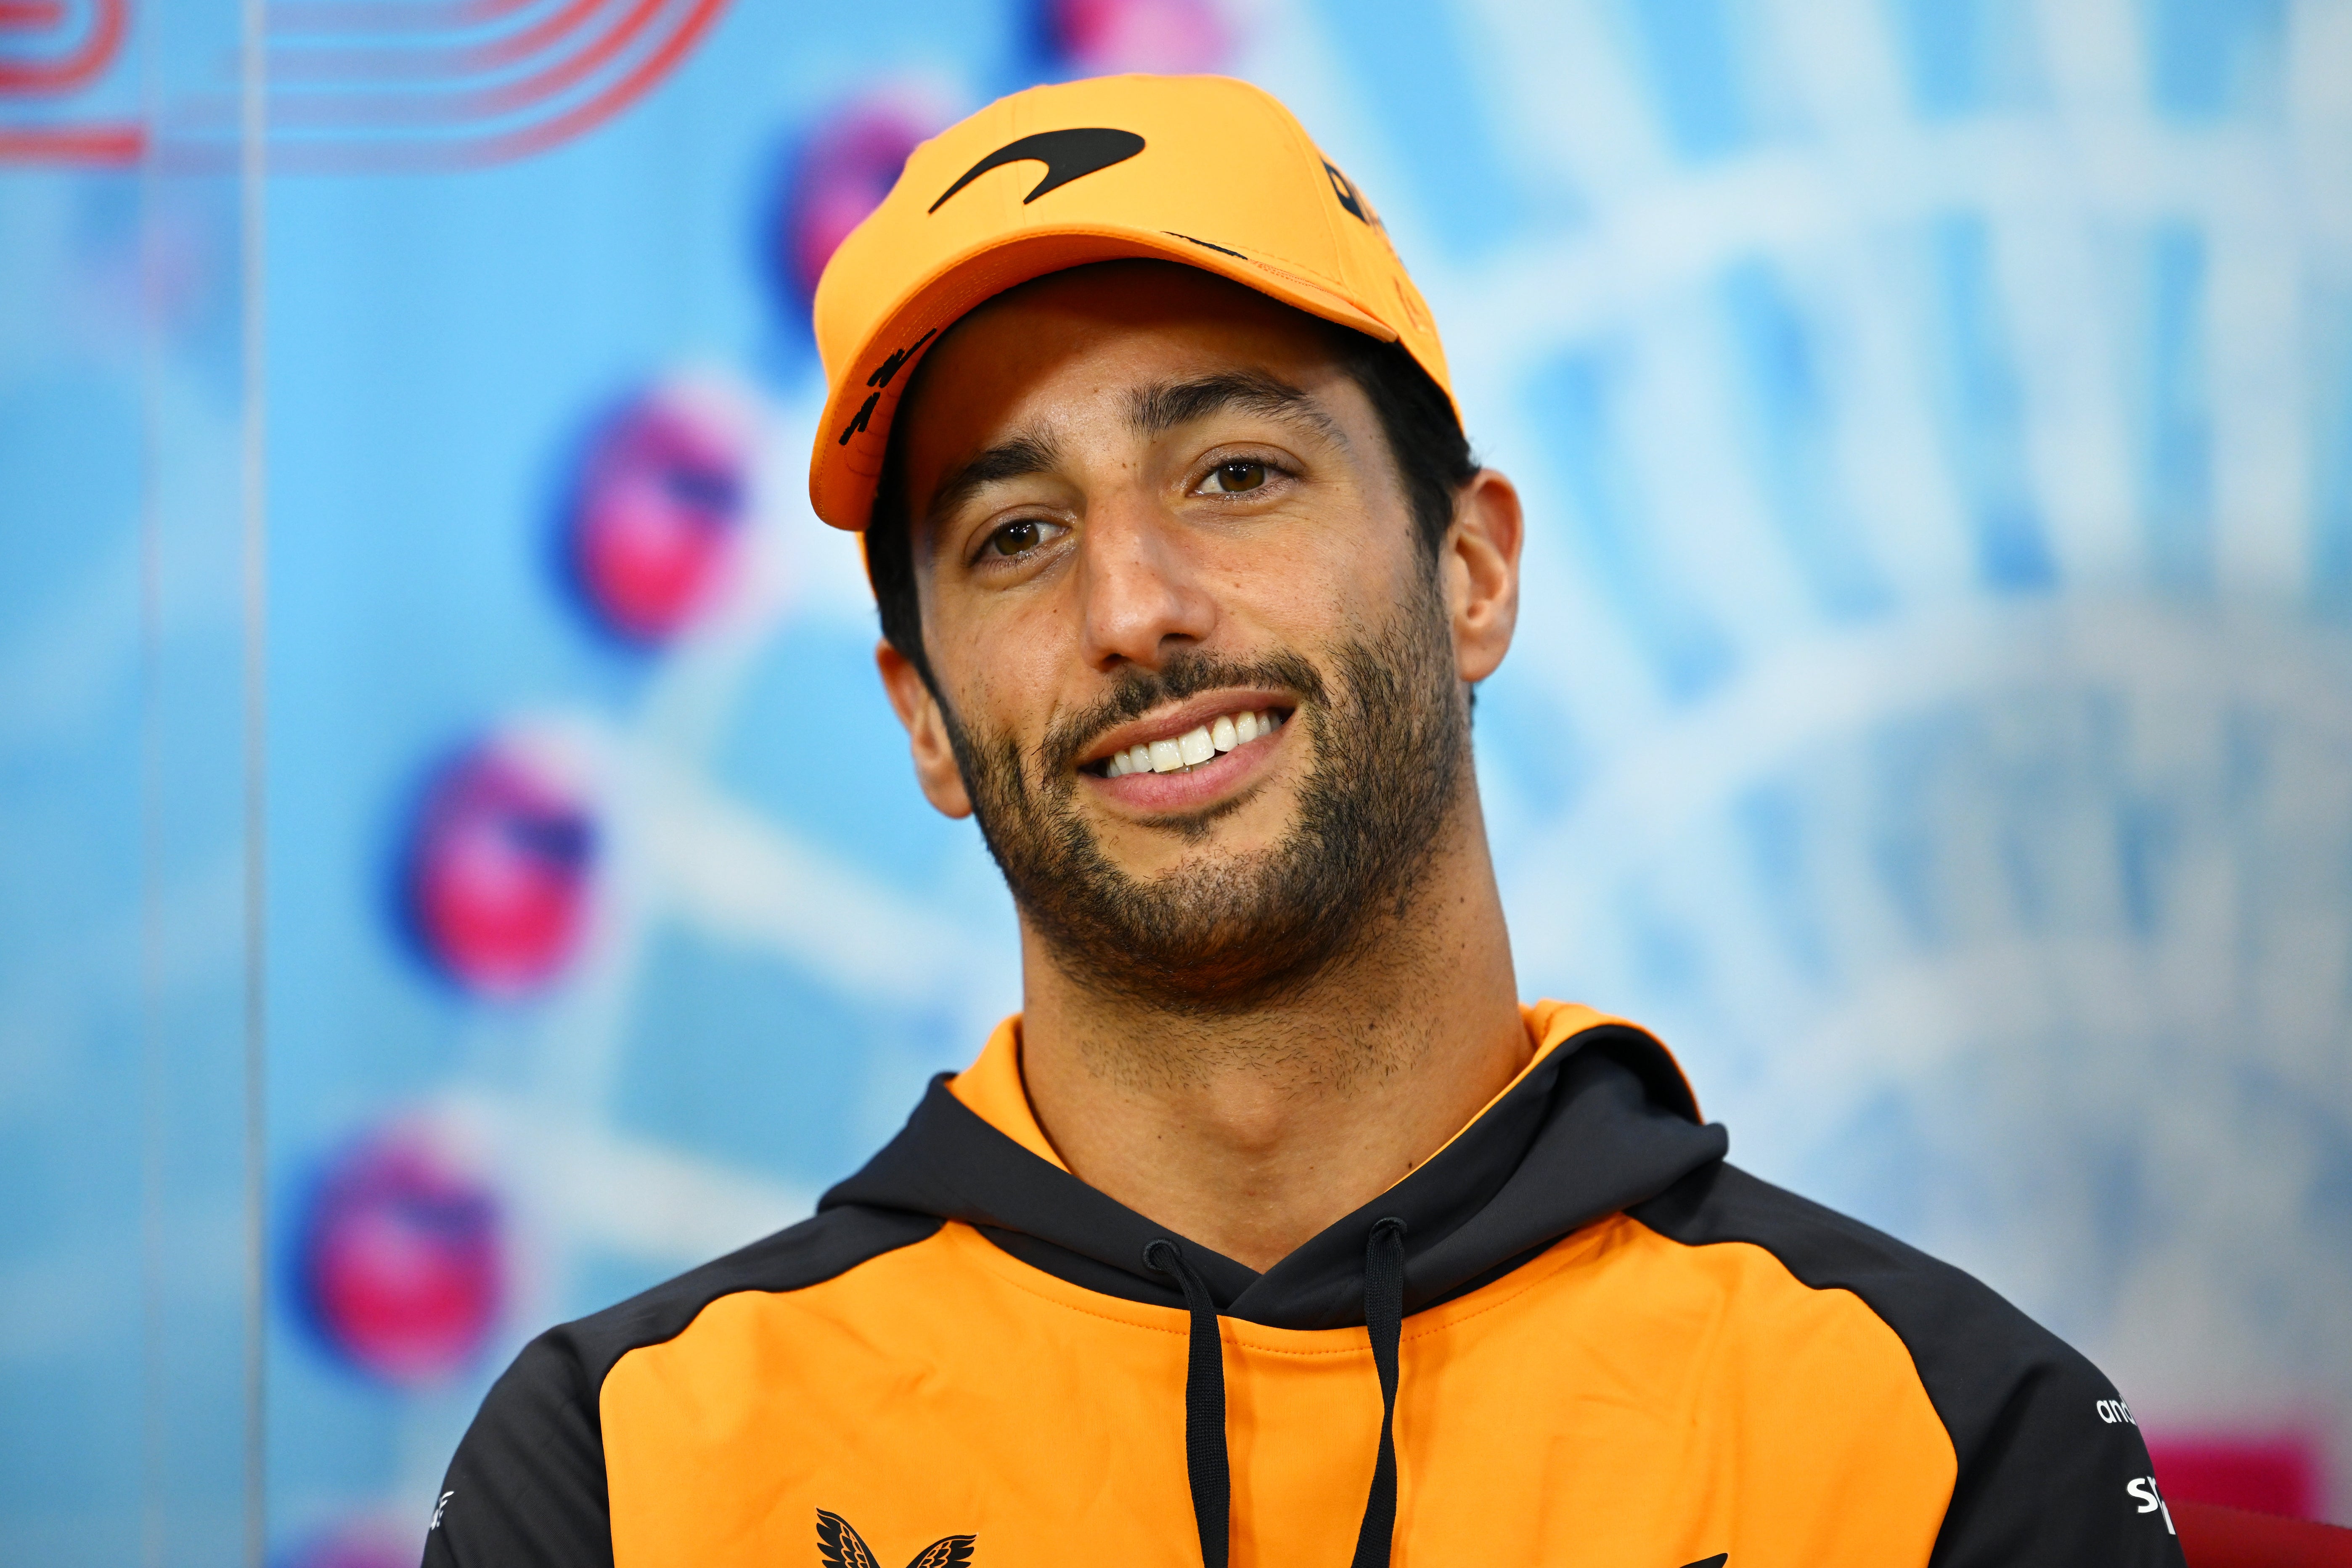 Daniel Ricciardo’s manager insists the driver is ‘not done’ in F1 after ...